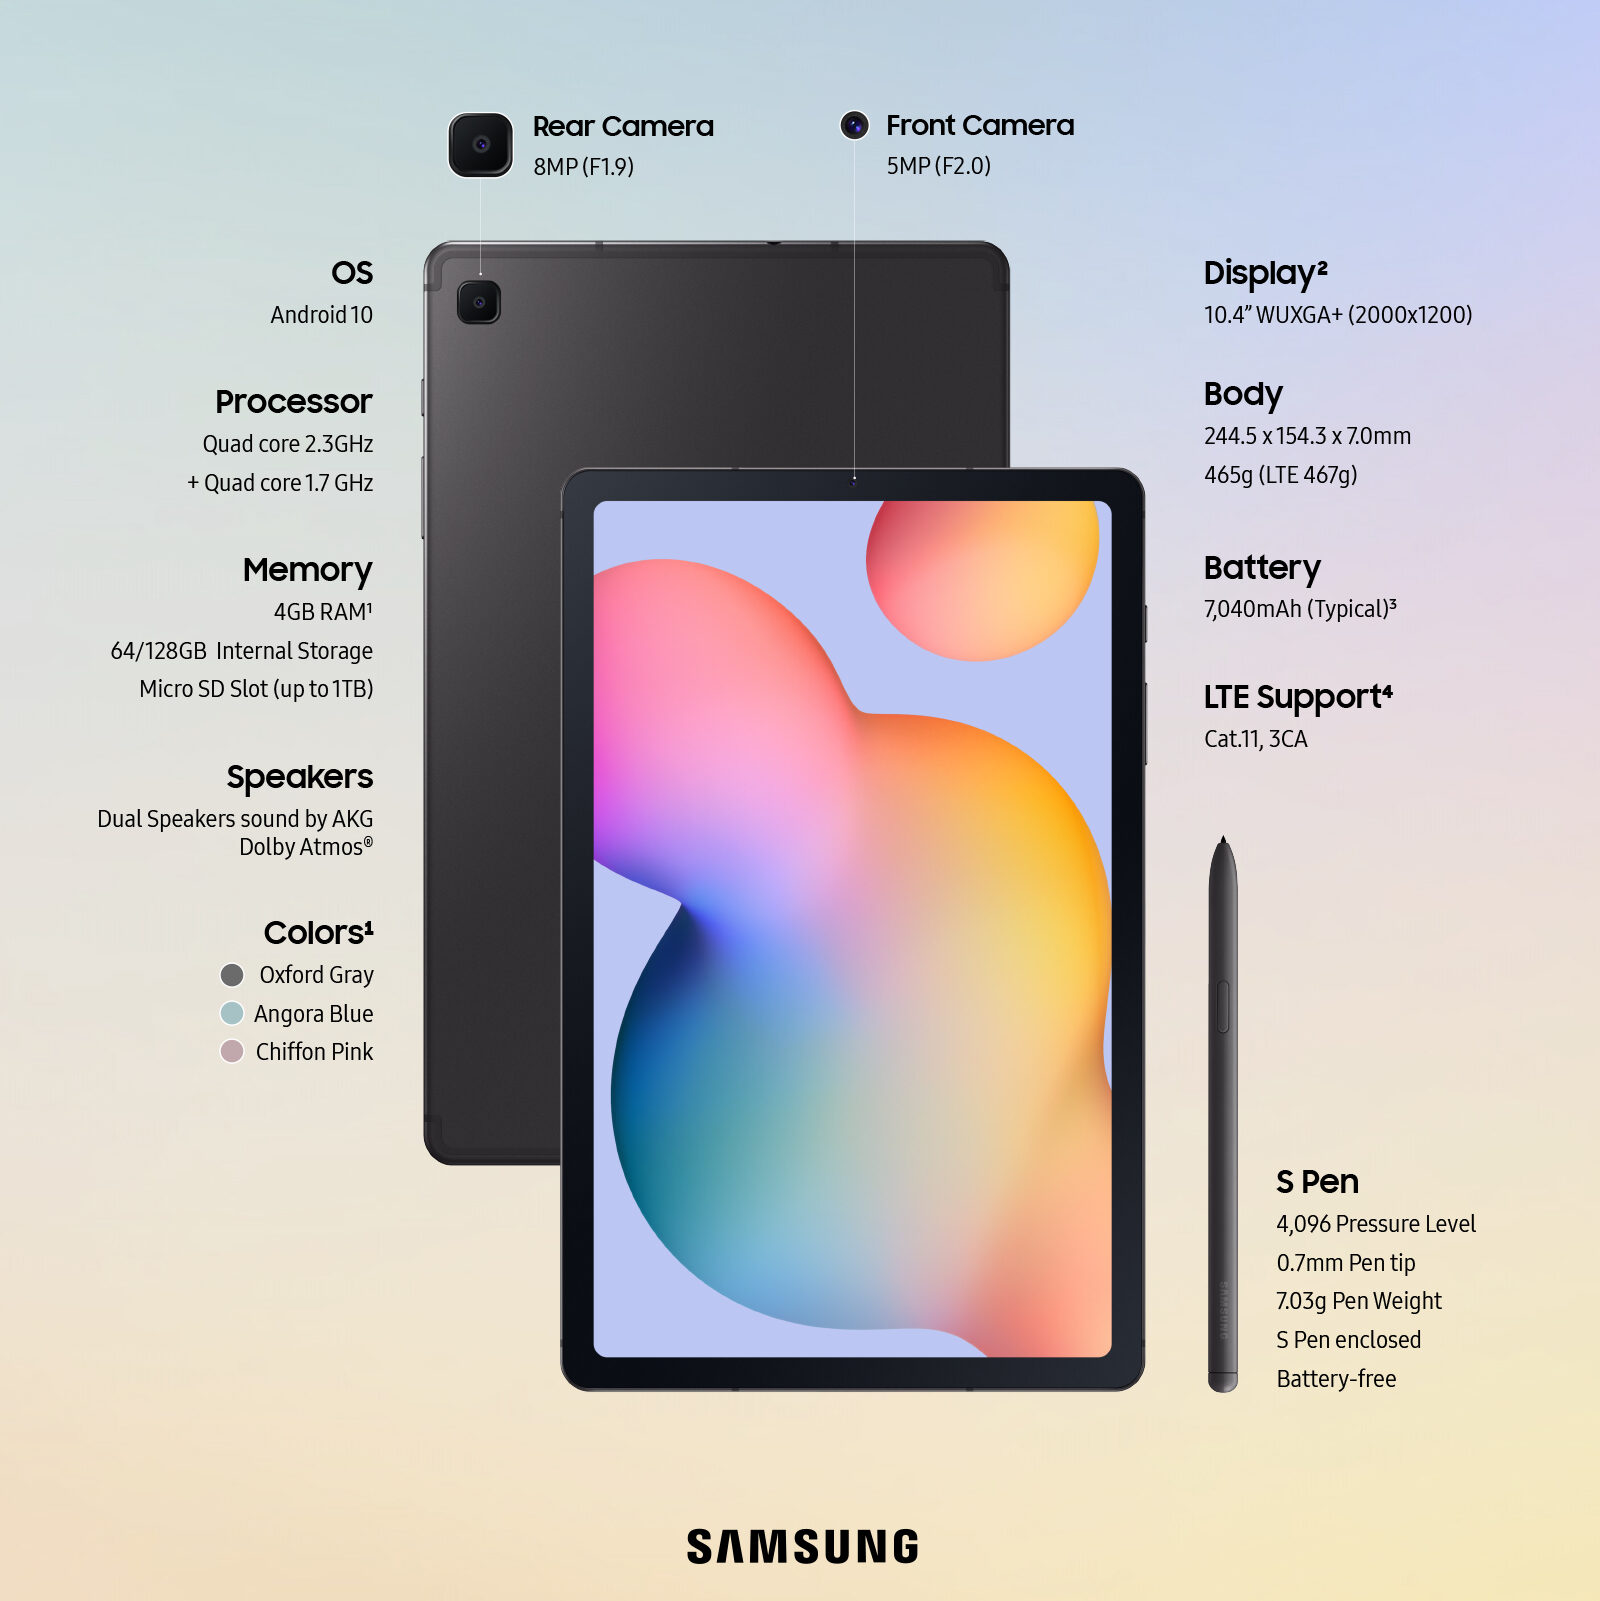 Samsung Galaxy Tab S6 Lite specifications